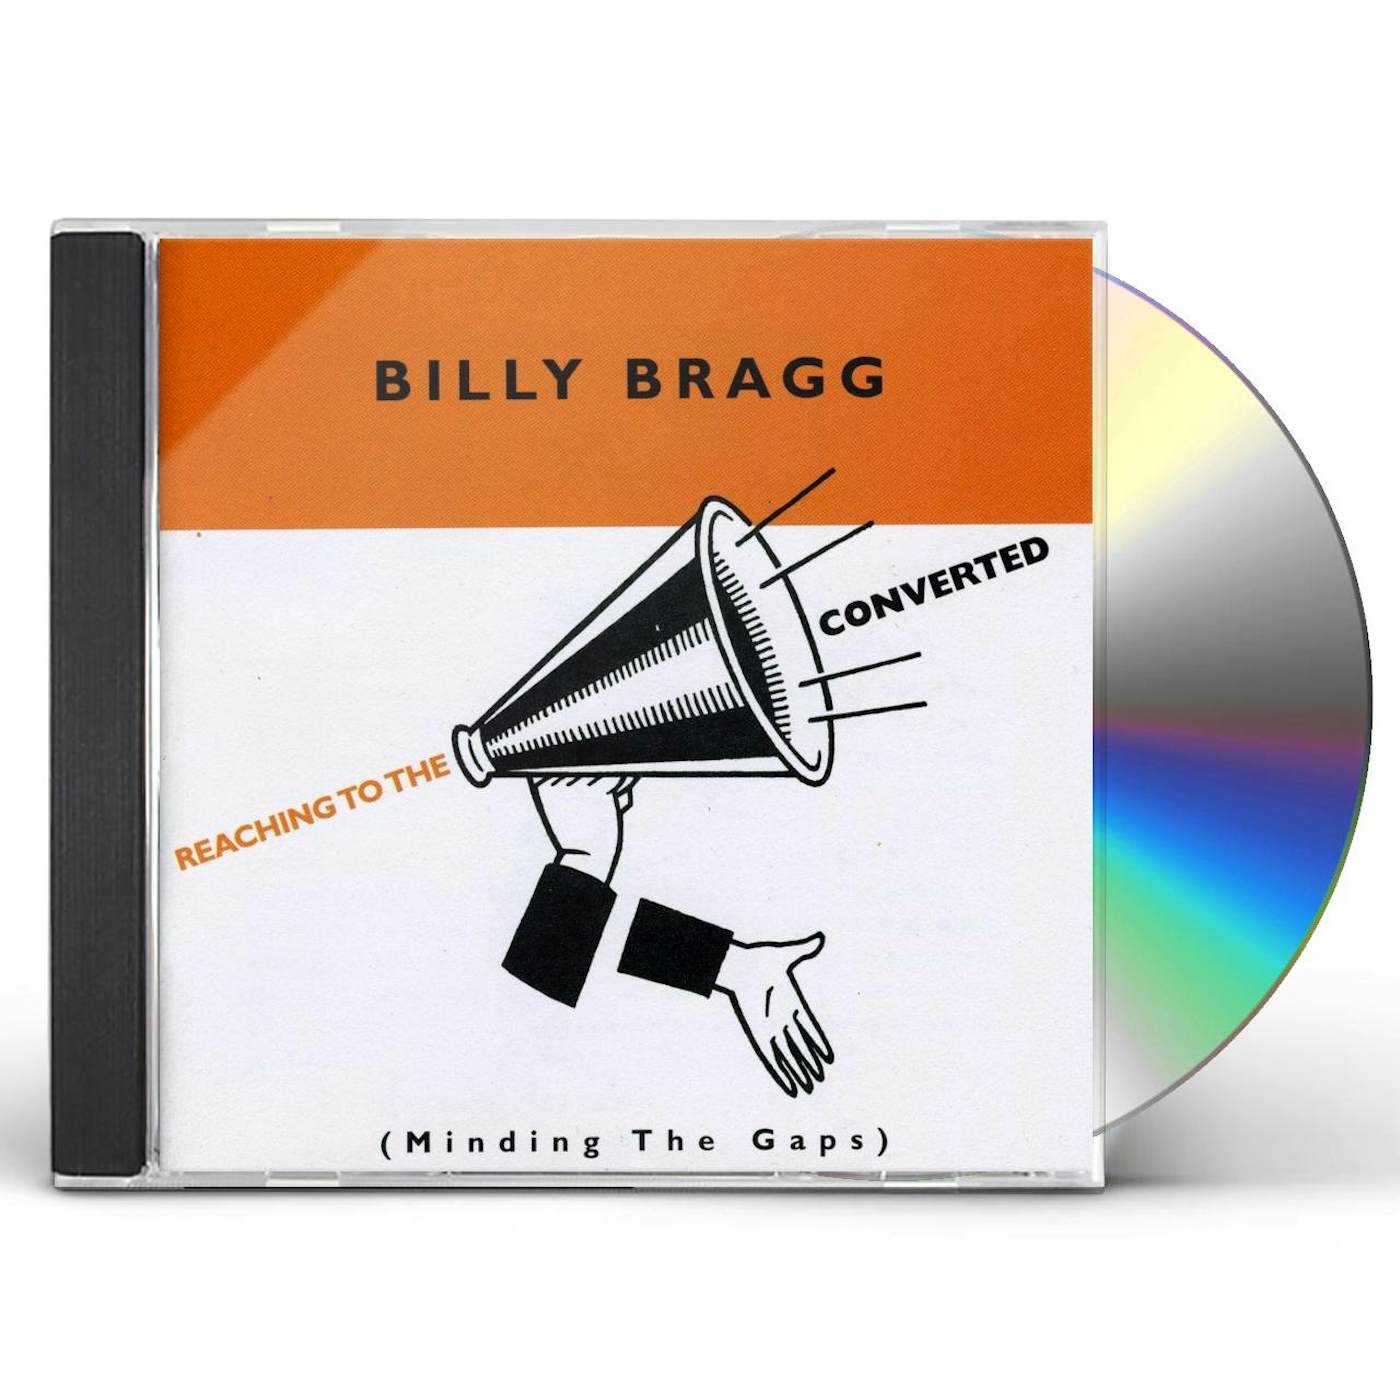 Billy Bragg REACHING TO THE CONVERTED CD